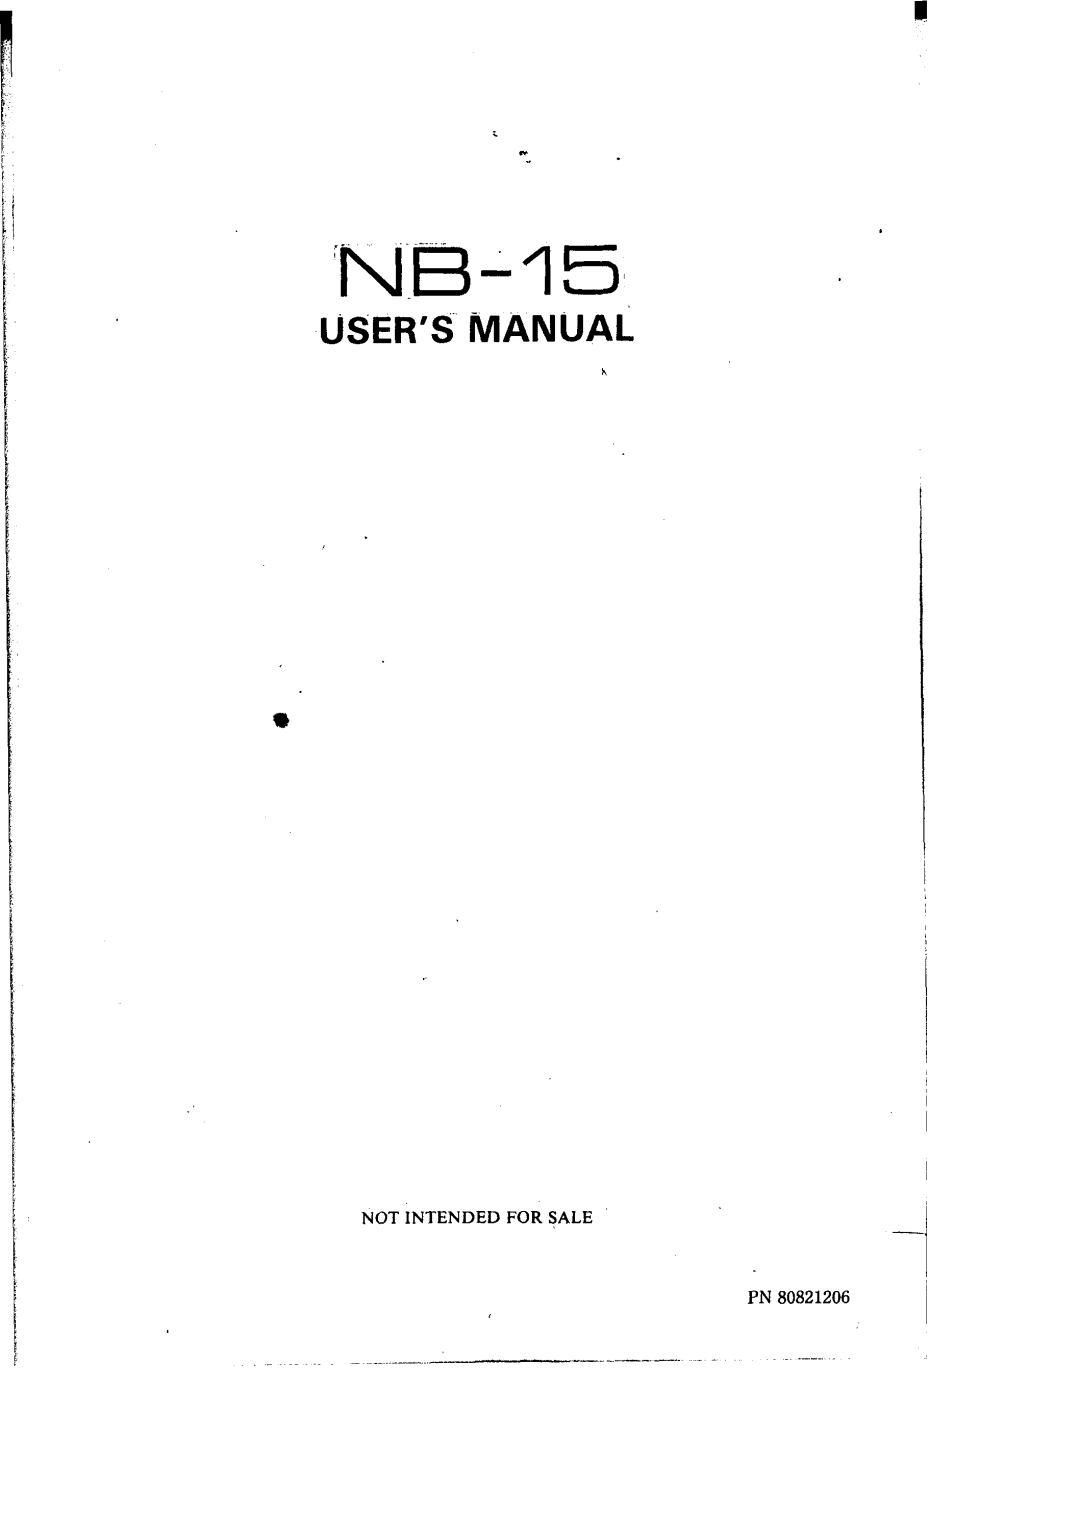 Star Micronics NB-15 user manual USER’S MANUAli, Not Intended For Sale Pn 